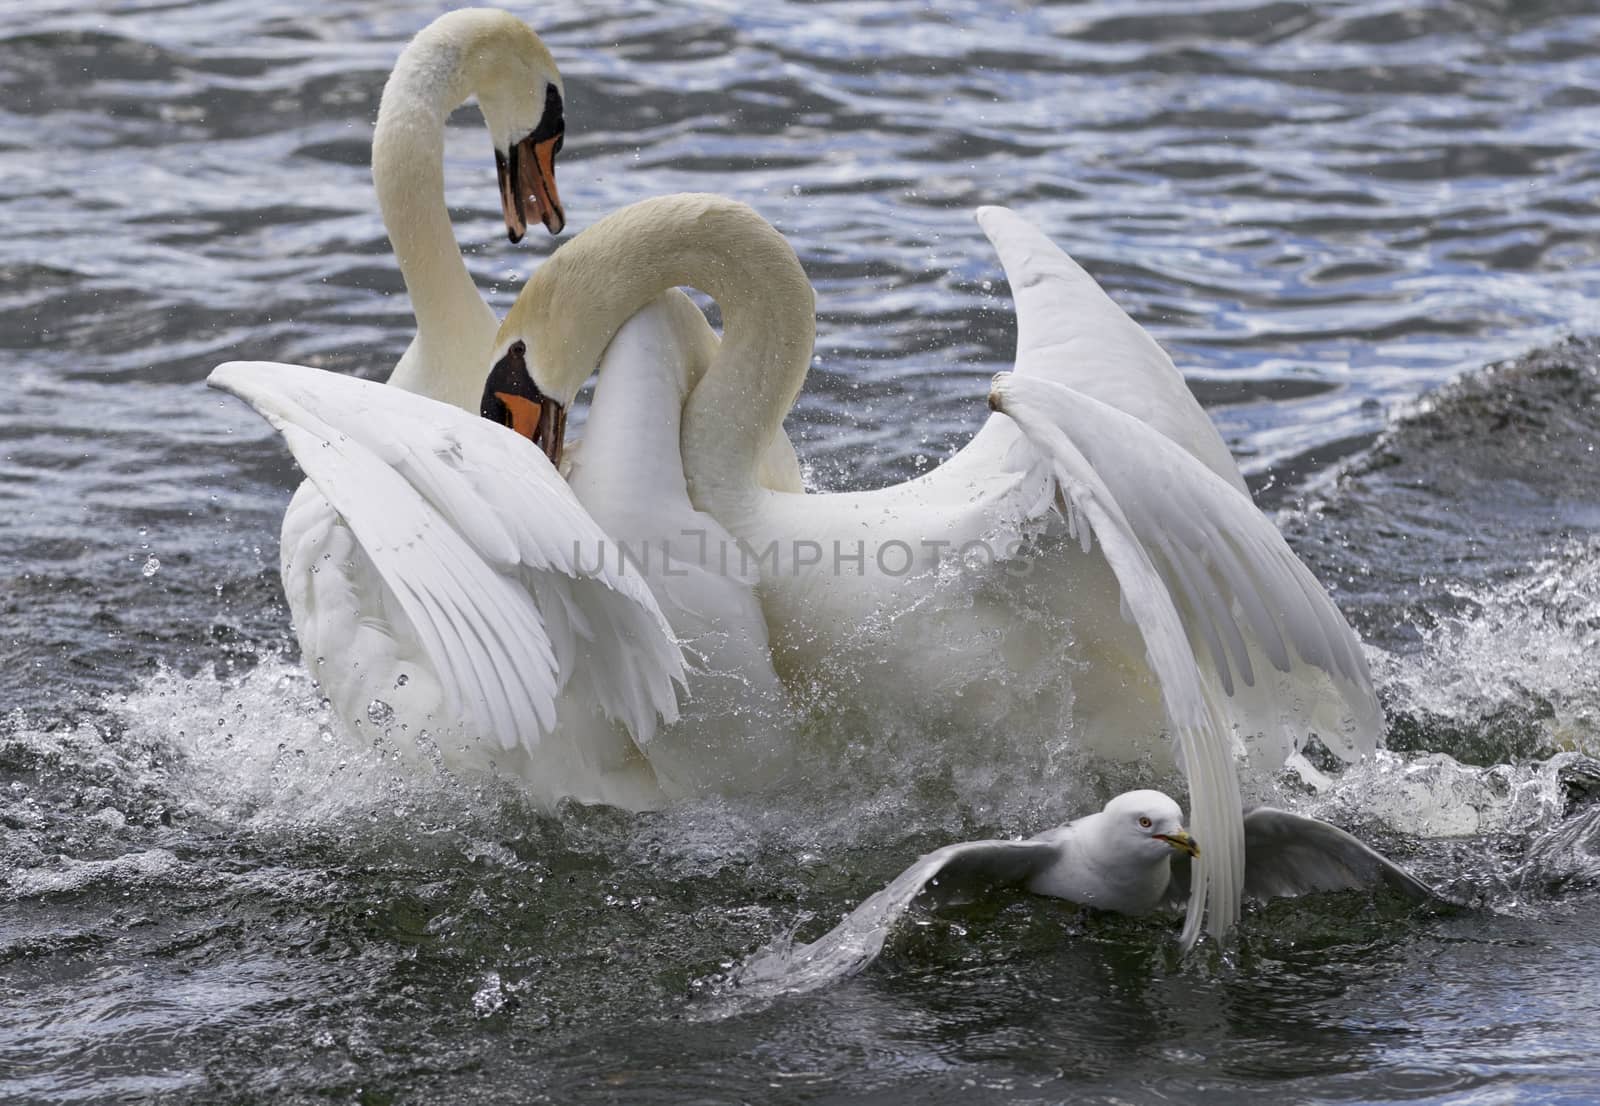 Amazing fight between the swans in the lake